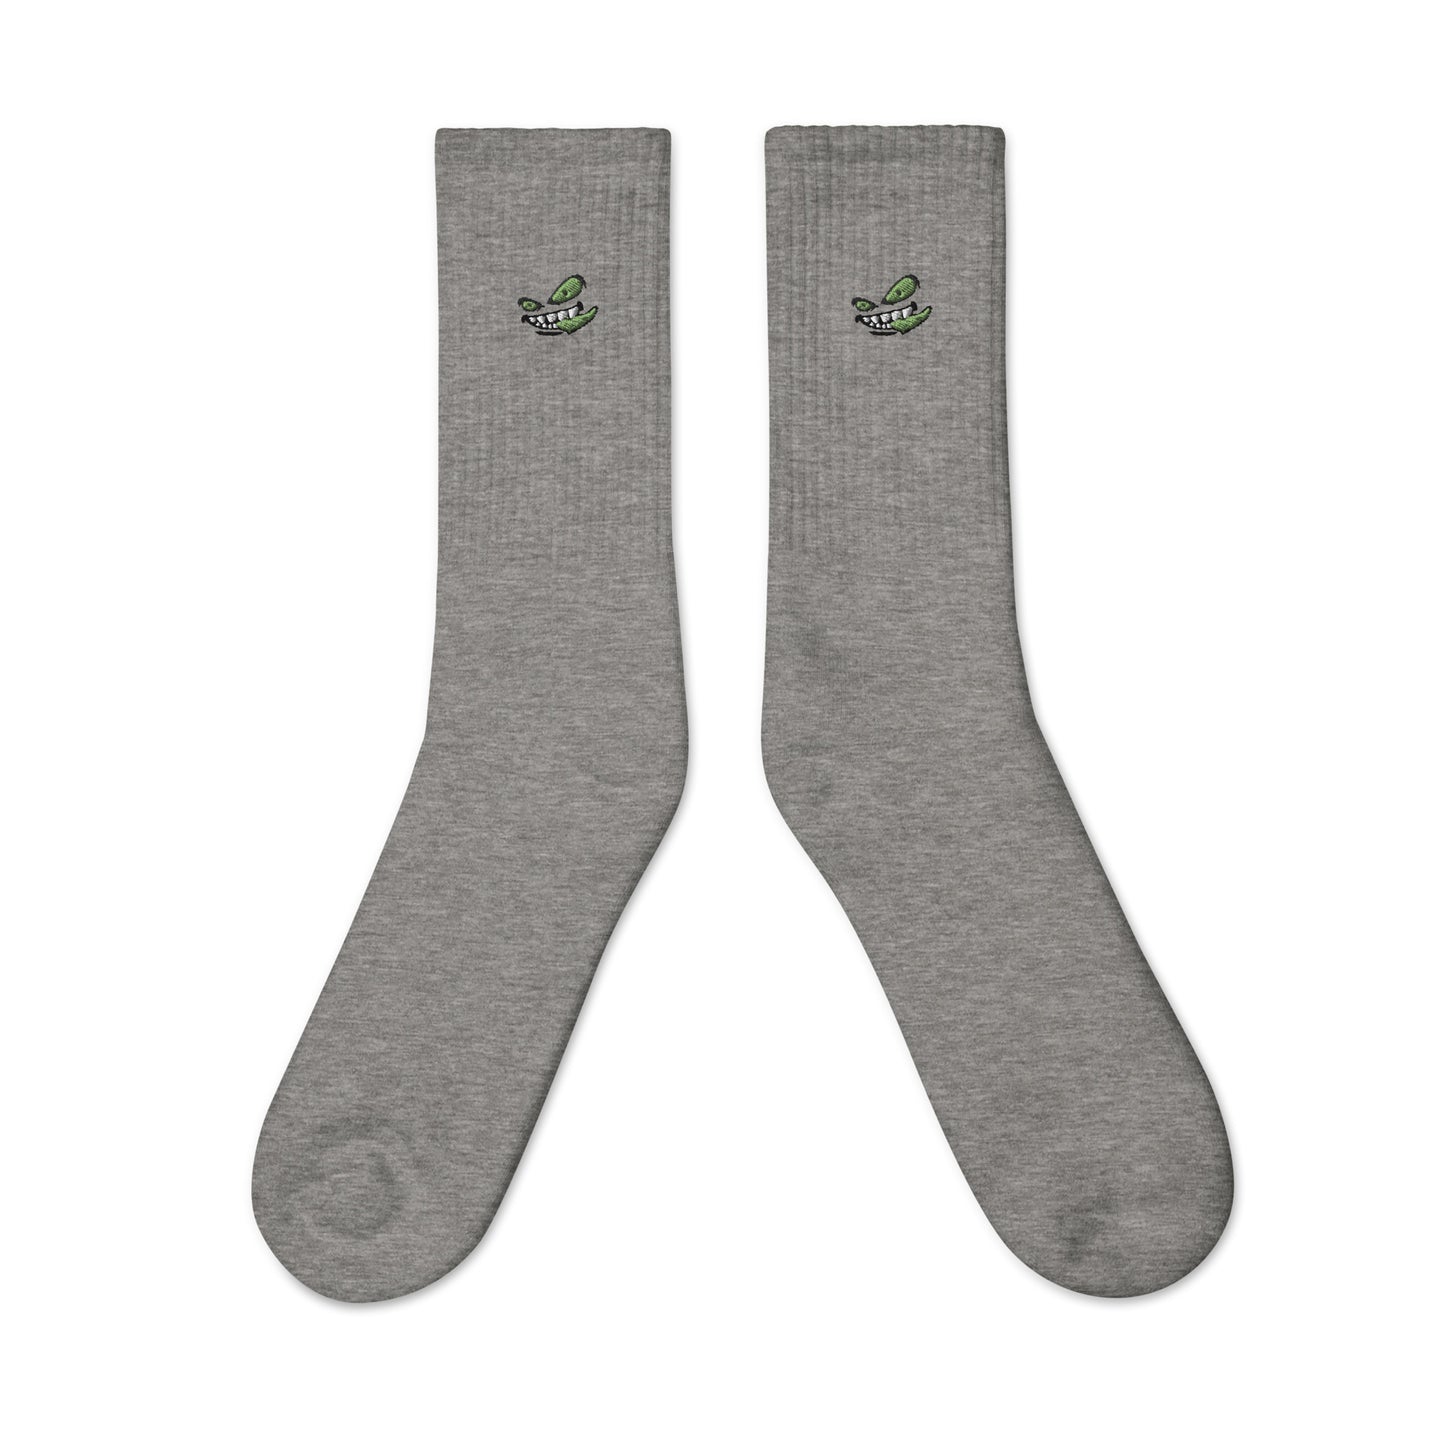  socks-from-the-front-with-monster-symbol